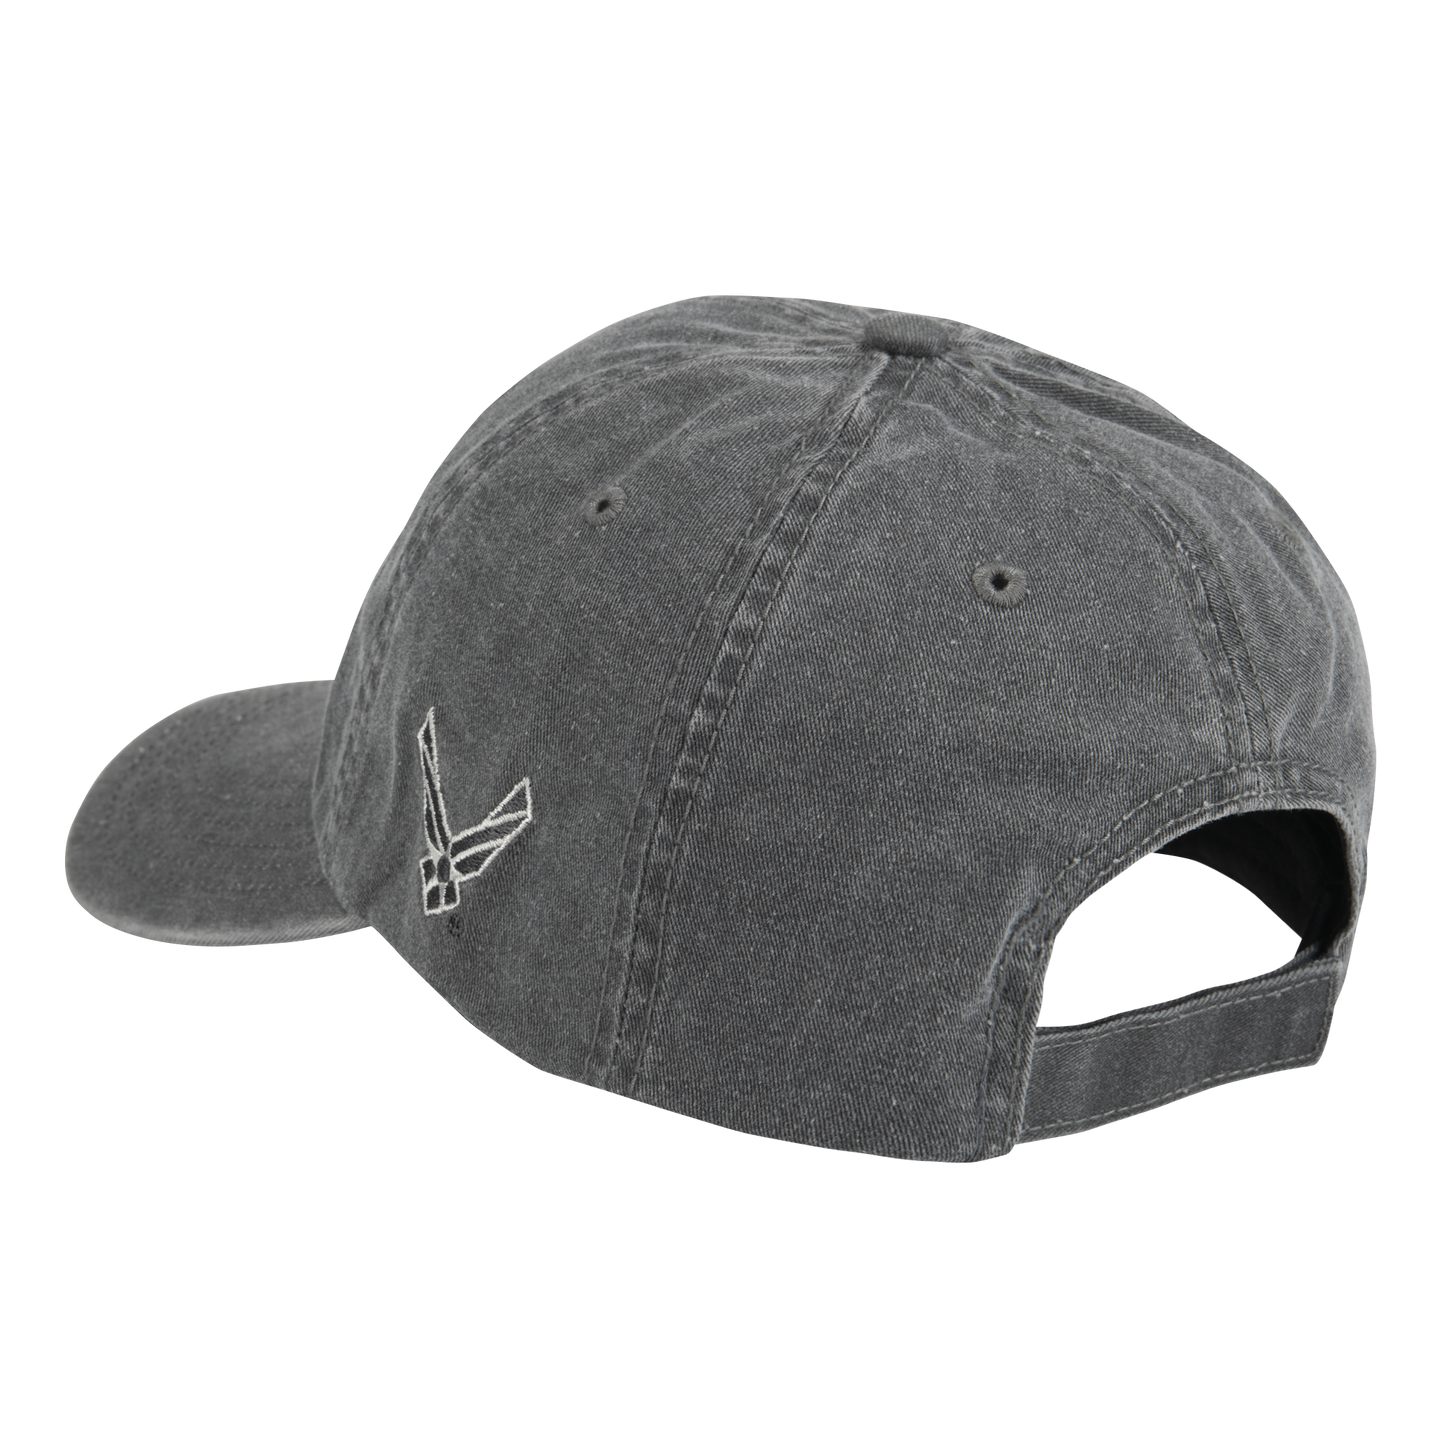 Washed Charcoal Flag Air Force Cap